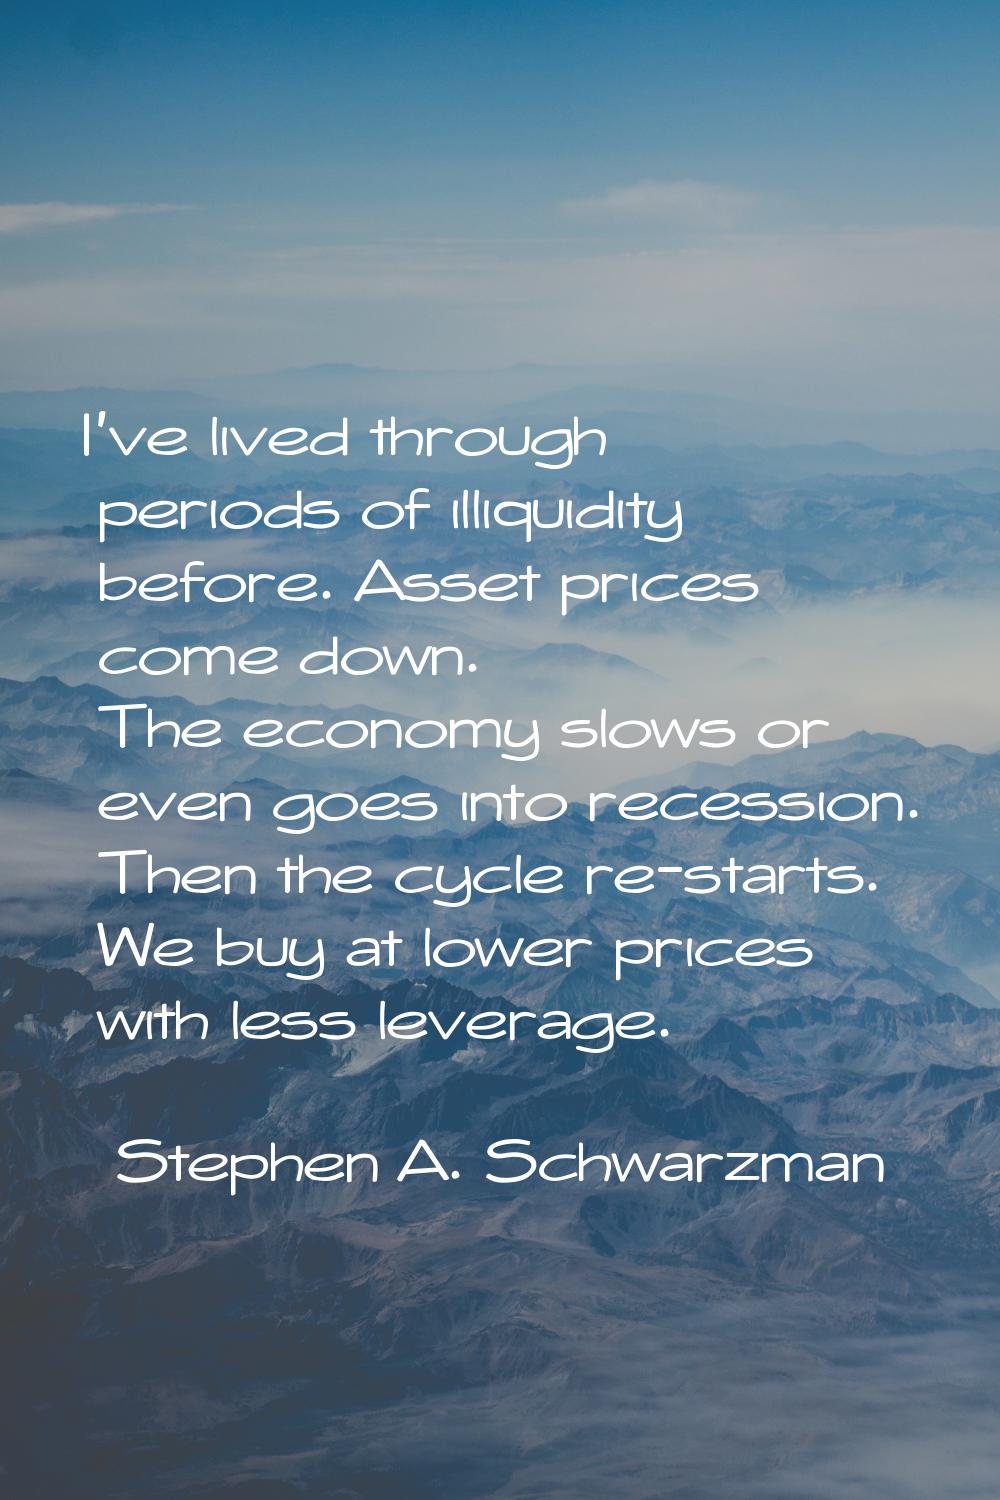 I've lived through periods of illiquidity before. Asset prices come down. The economy slows or even